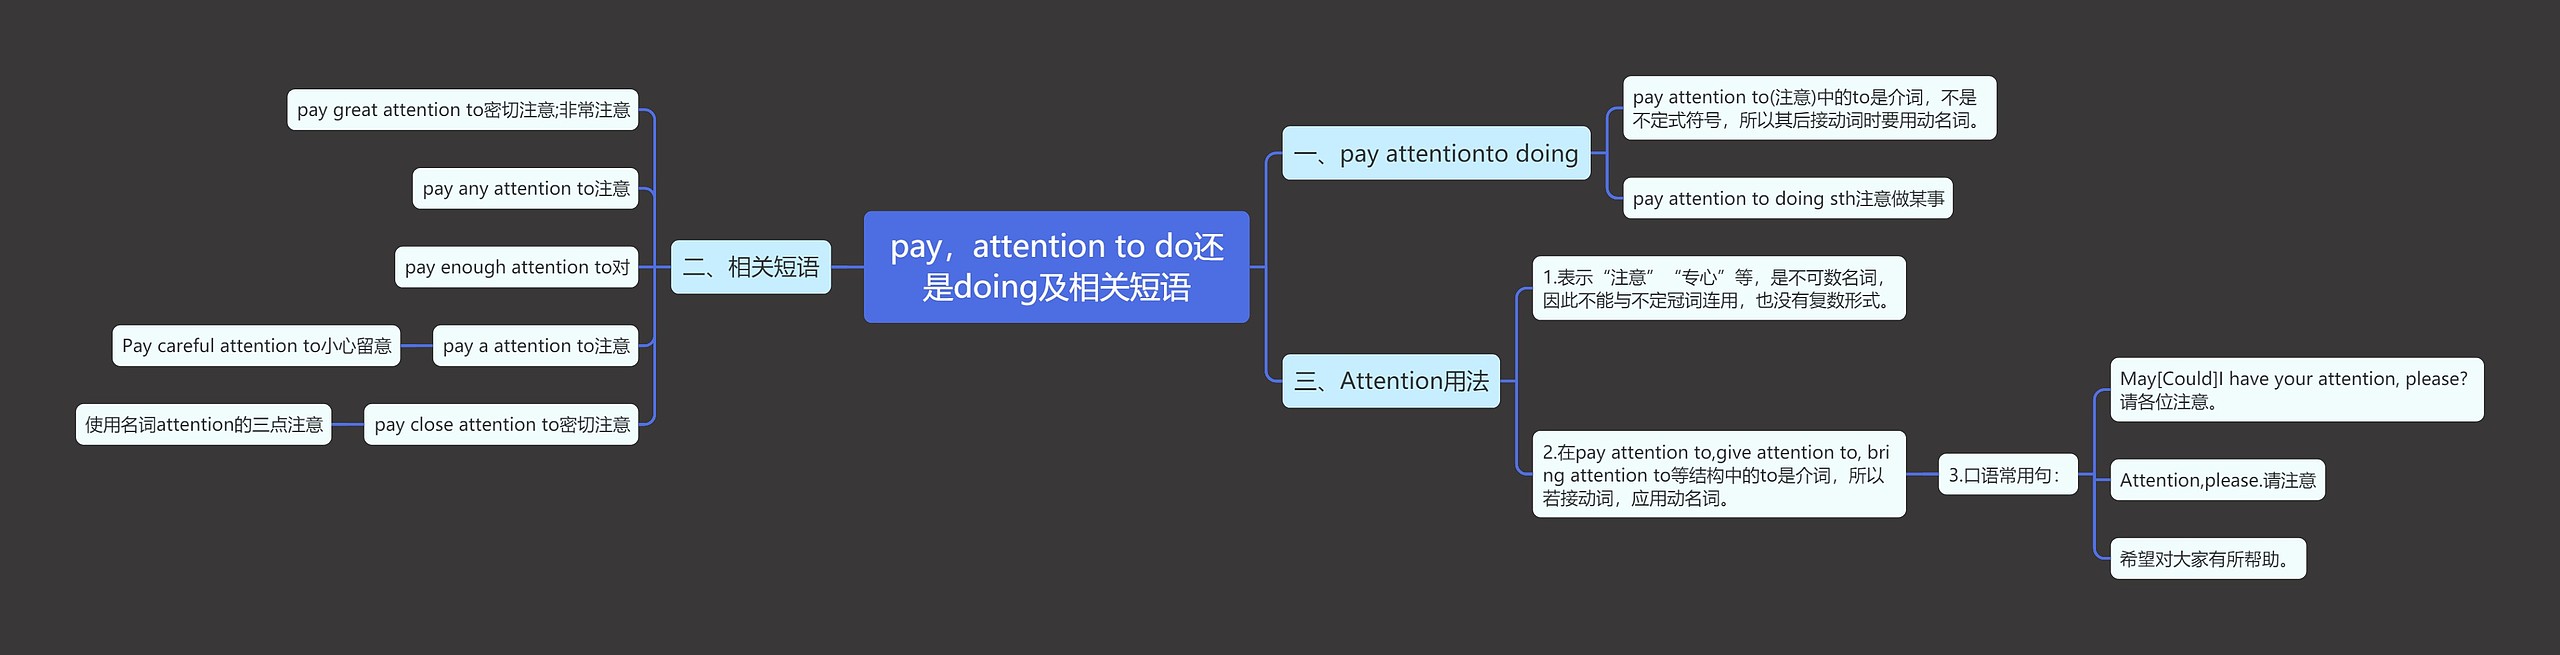 pay，attention to do还是doing及相关短语